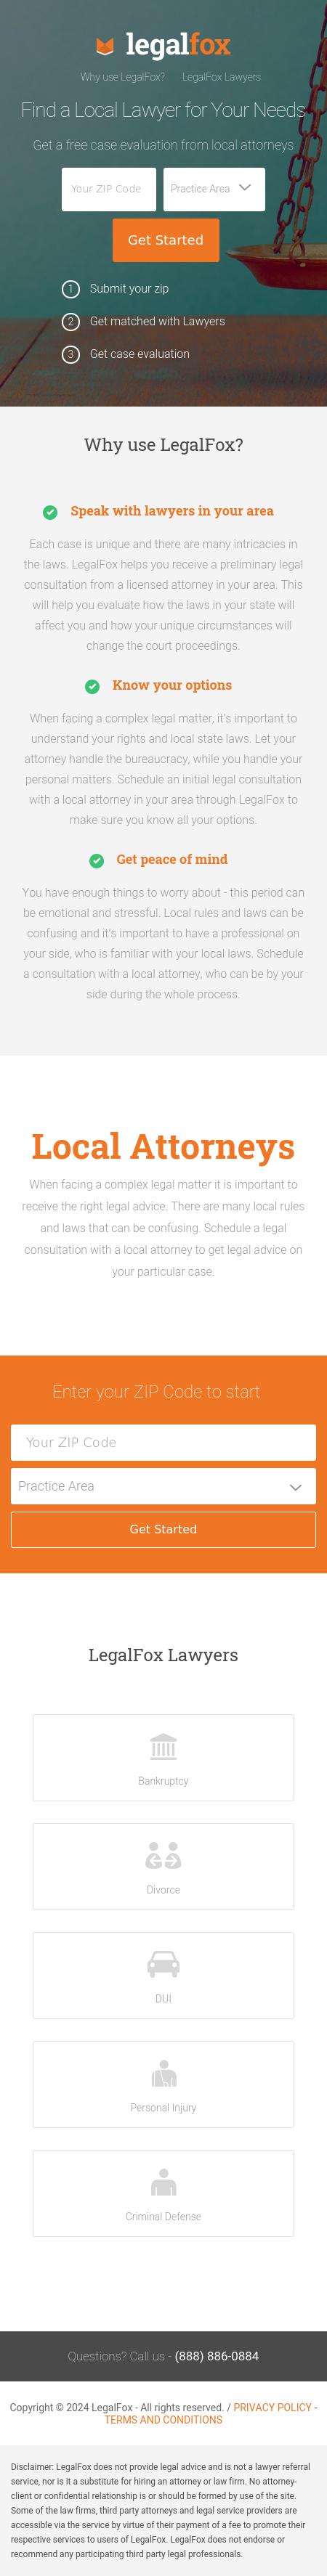 Find a Local Attorney - Mooresville NC Lawyers